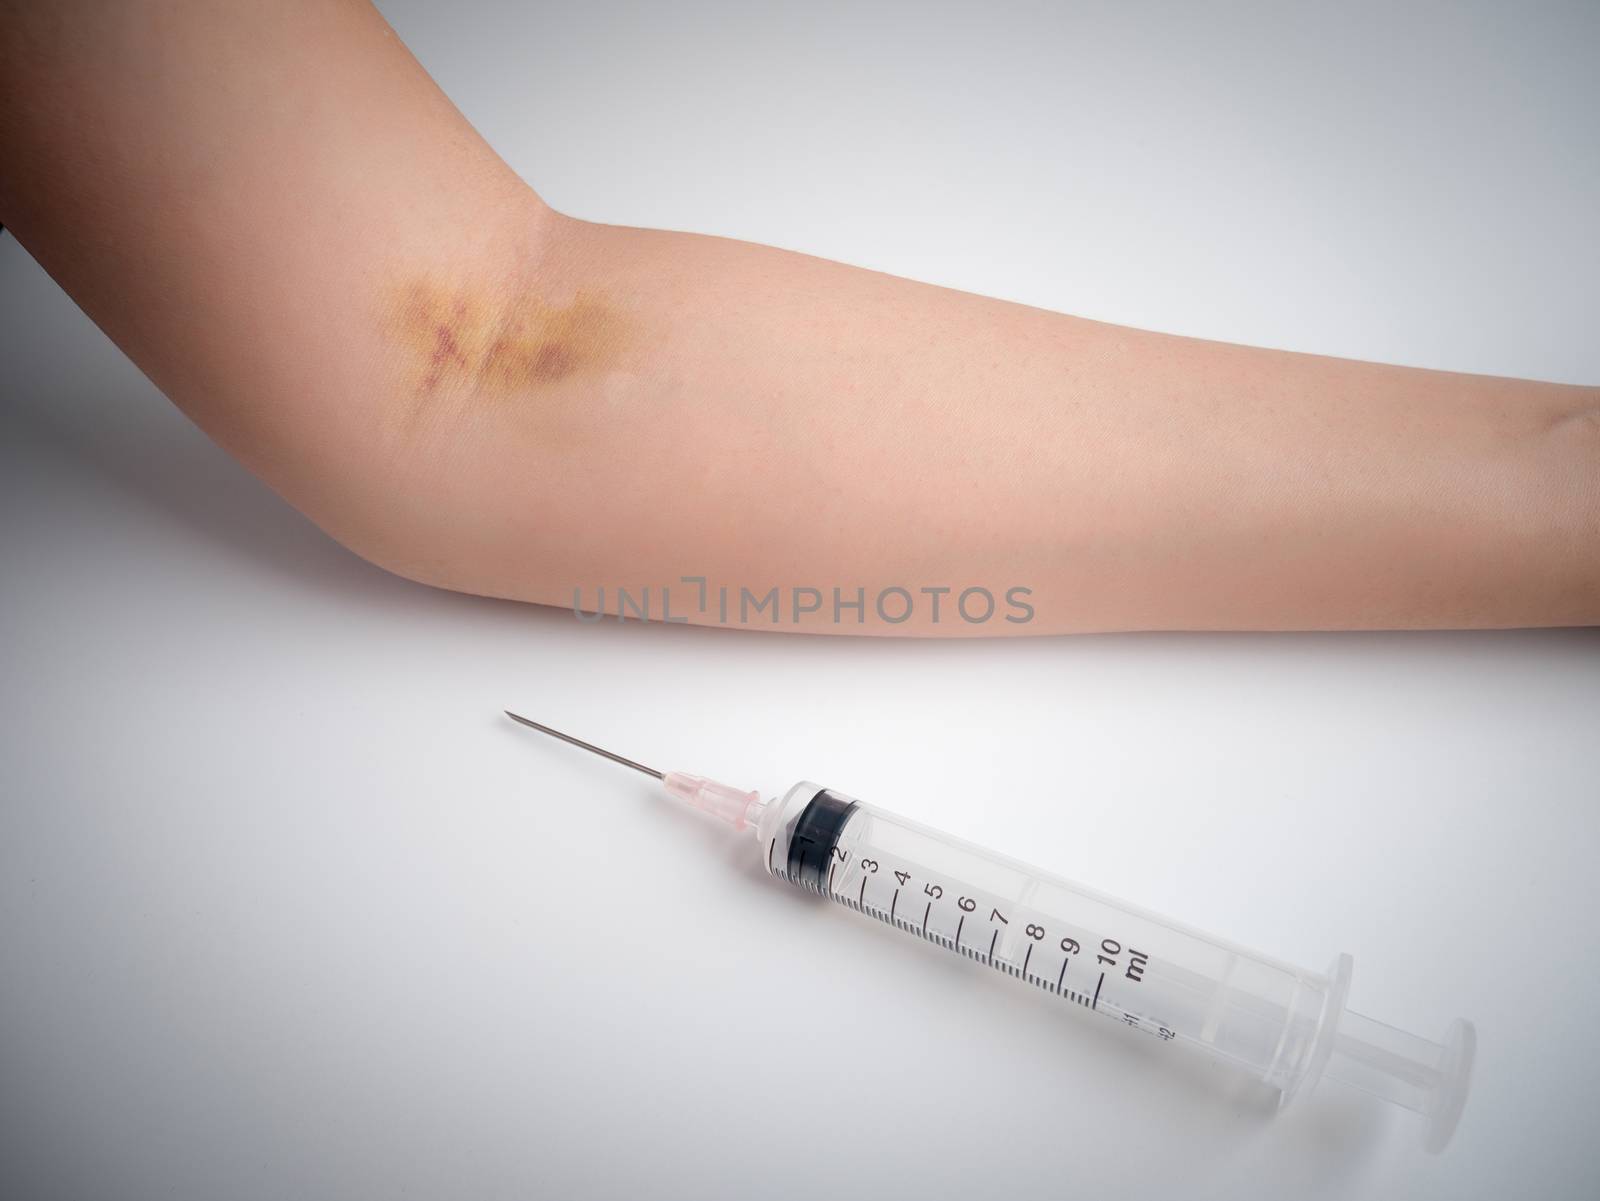 syringe , injection needle on the table and close up arm with bruise effect from frequent injection by asiandelight